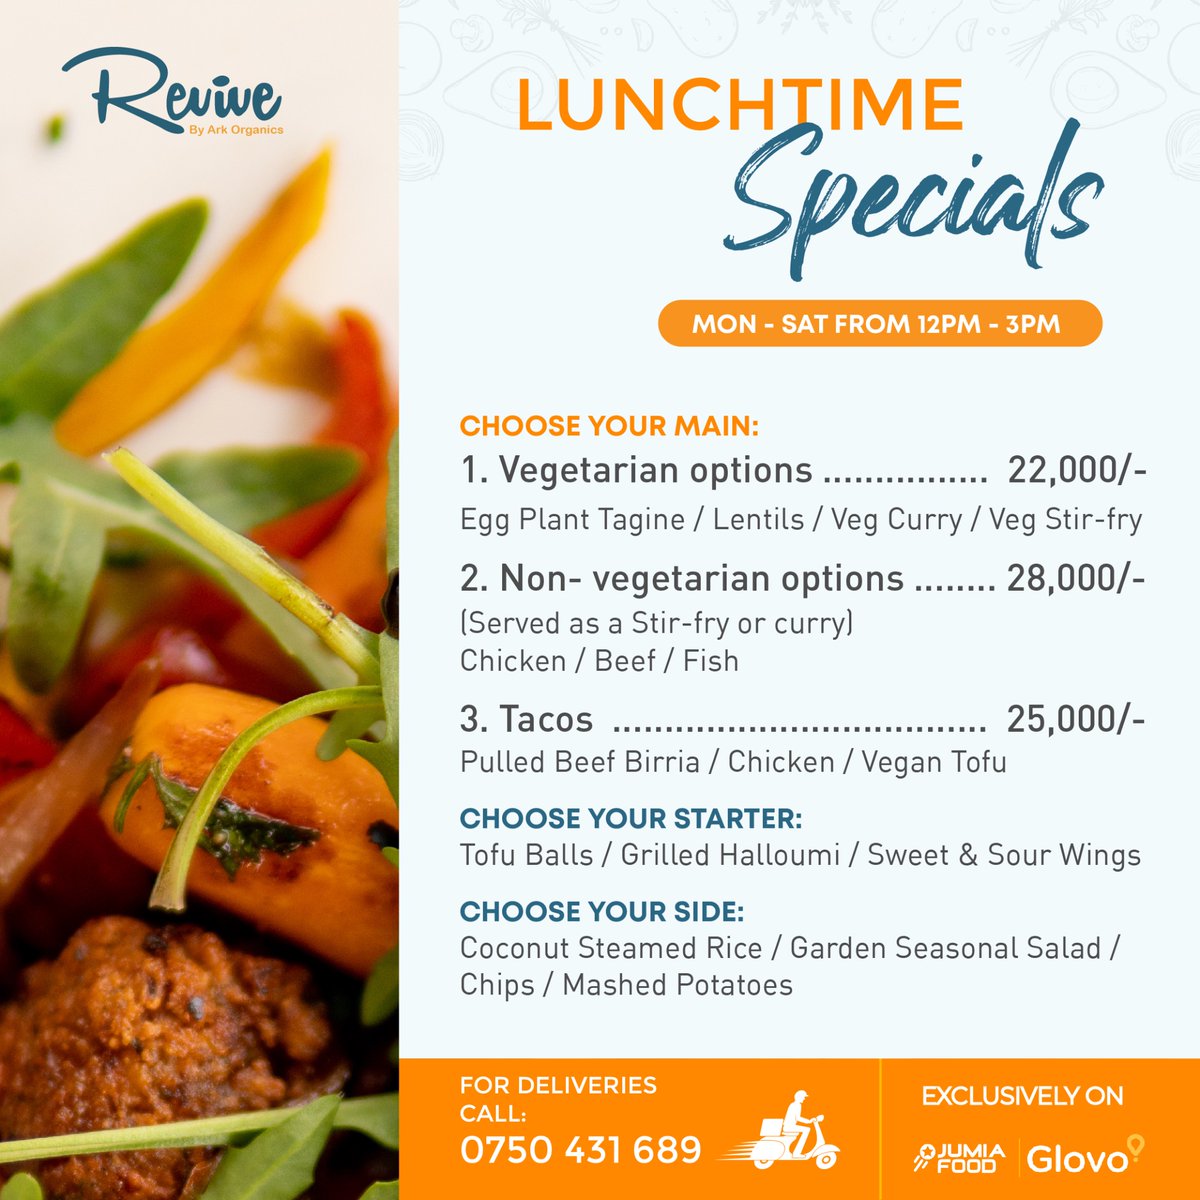 Delicious lunch specials await you! Order with us on 0750431689 from 12pm - 3pm and indulge in a satisfying meal at great prices. See you soon! 

Get ordering with Jumia or Glovo too for your lunch specials.

#lunchspecials #greatprices #satisfying #revivebyarkorganics